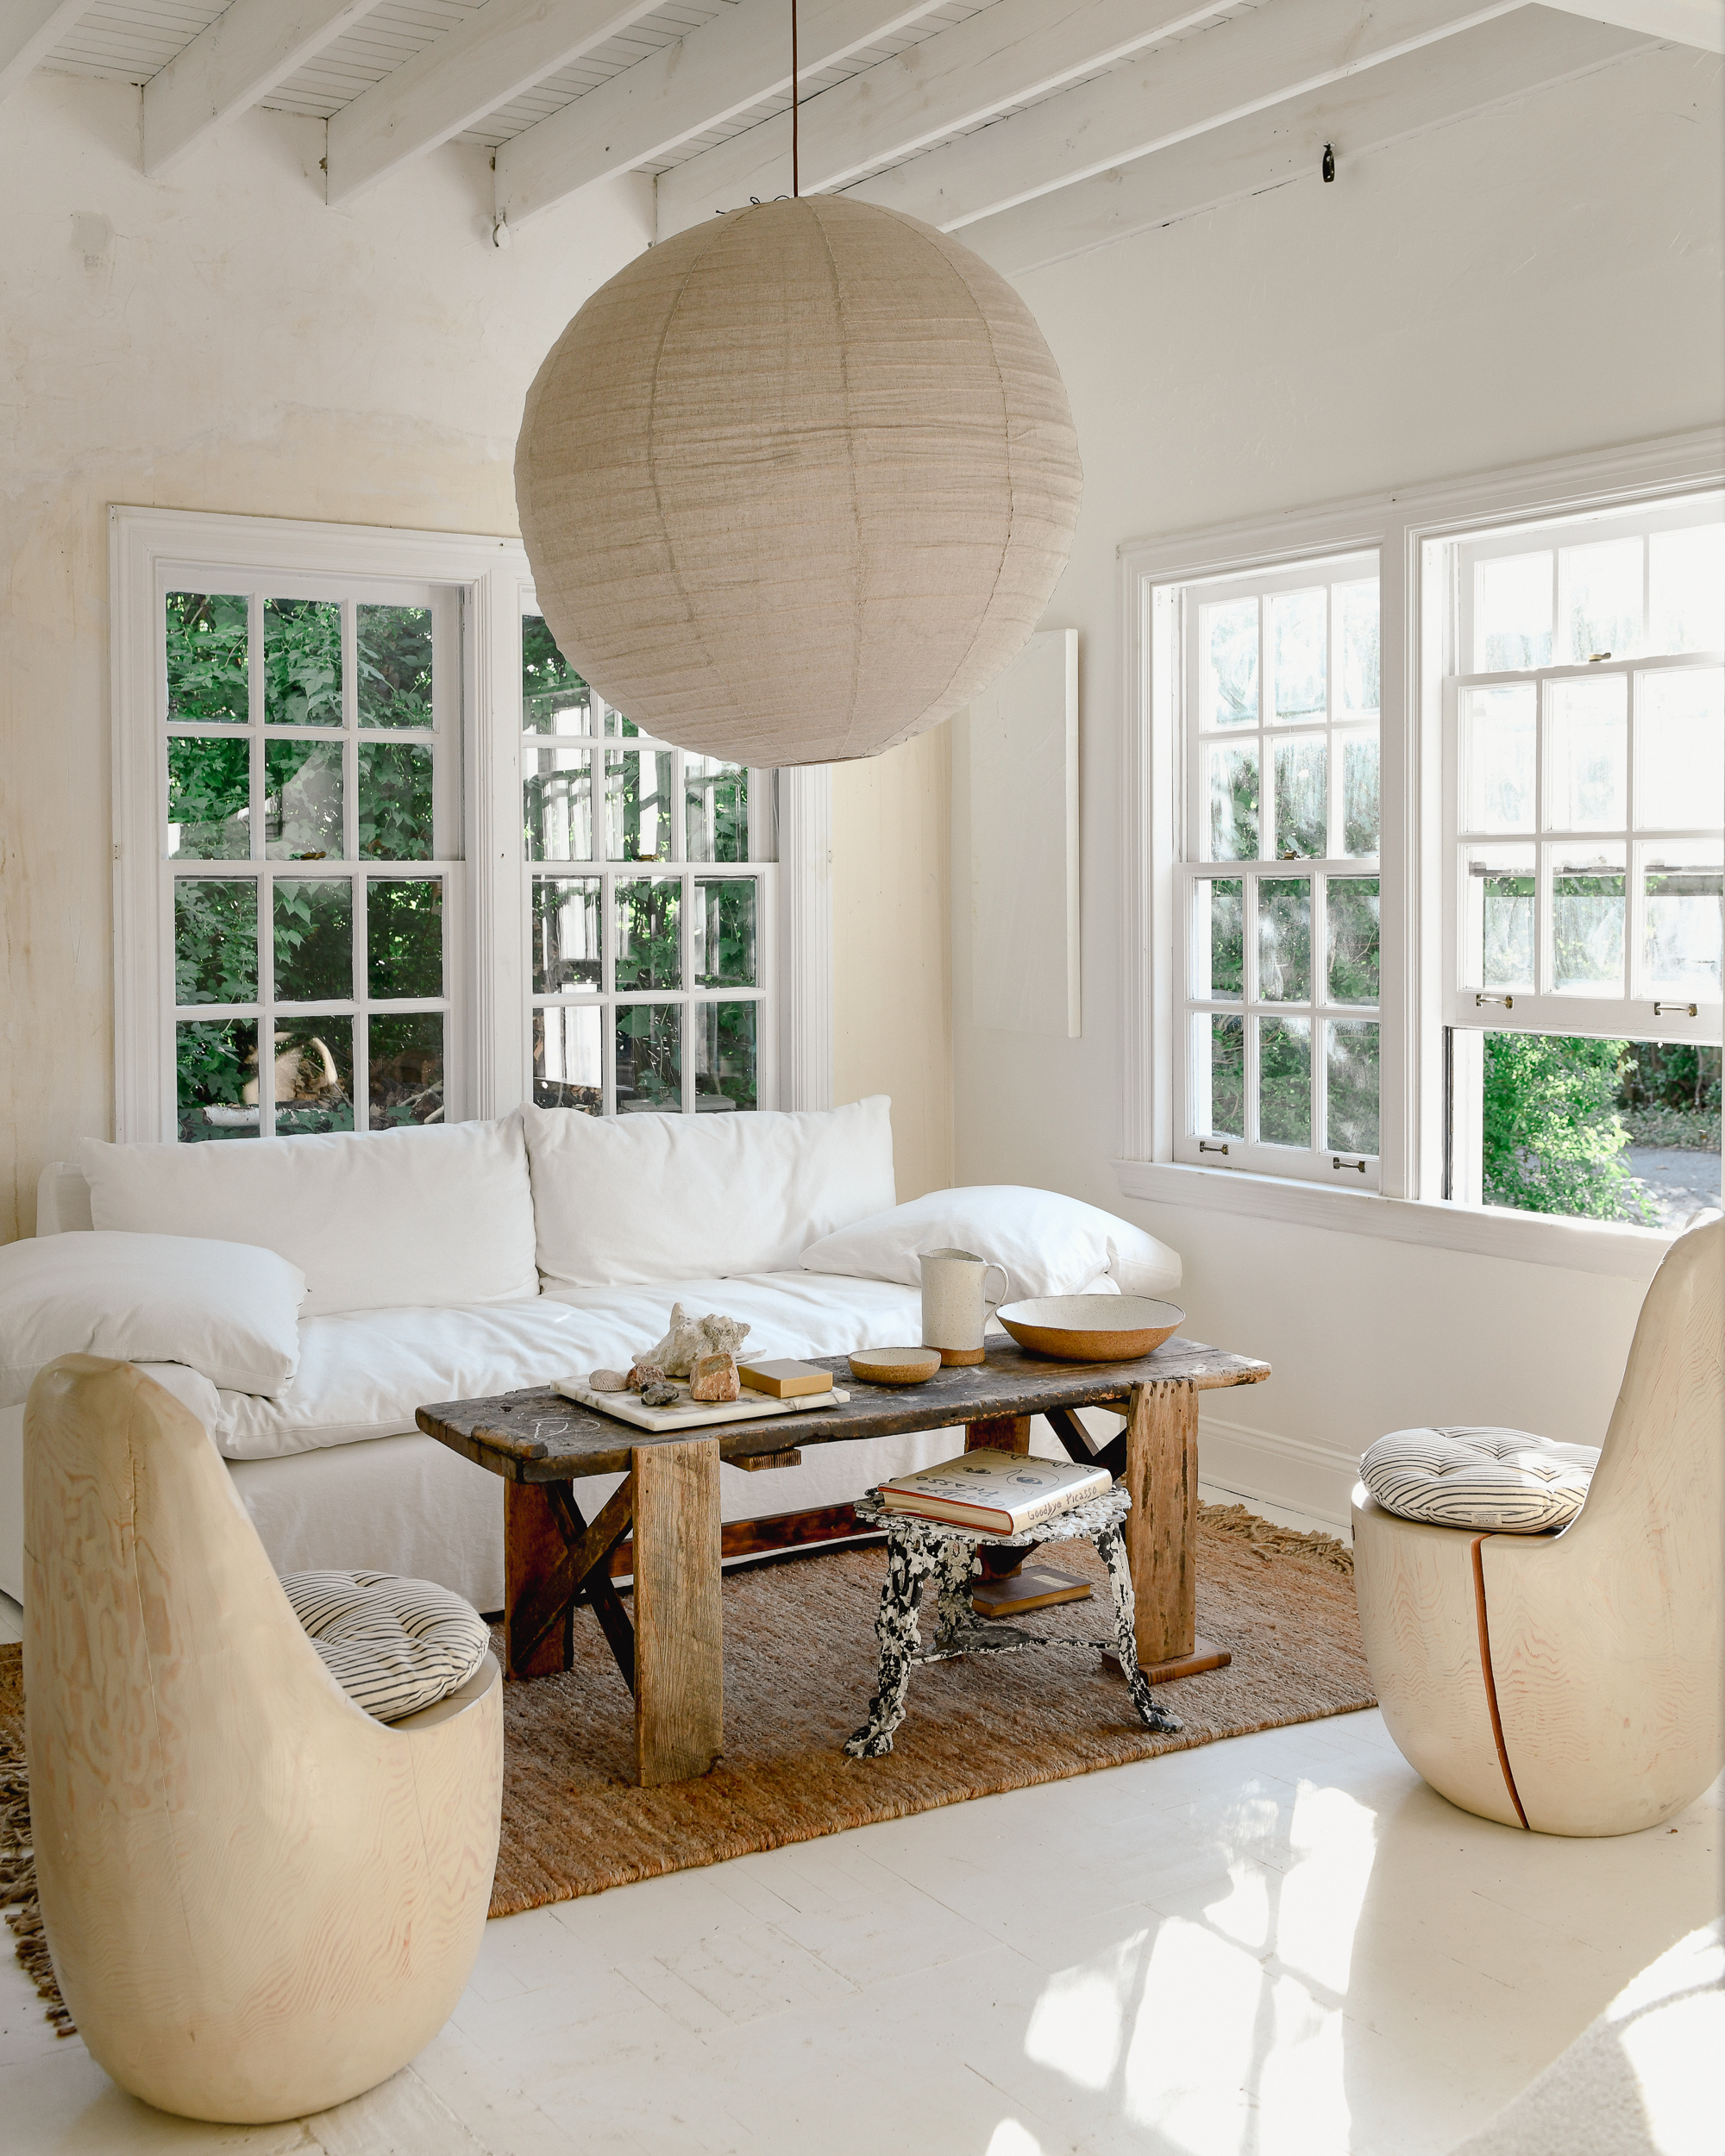 Leanne Ford’s living room with walls painted in Natural White and styled with furniture and accents in creamy whites and beige